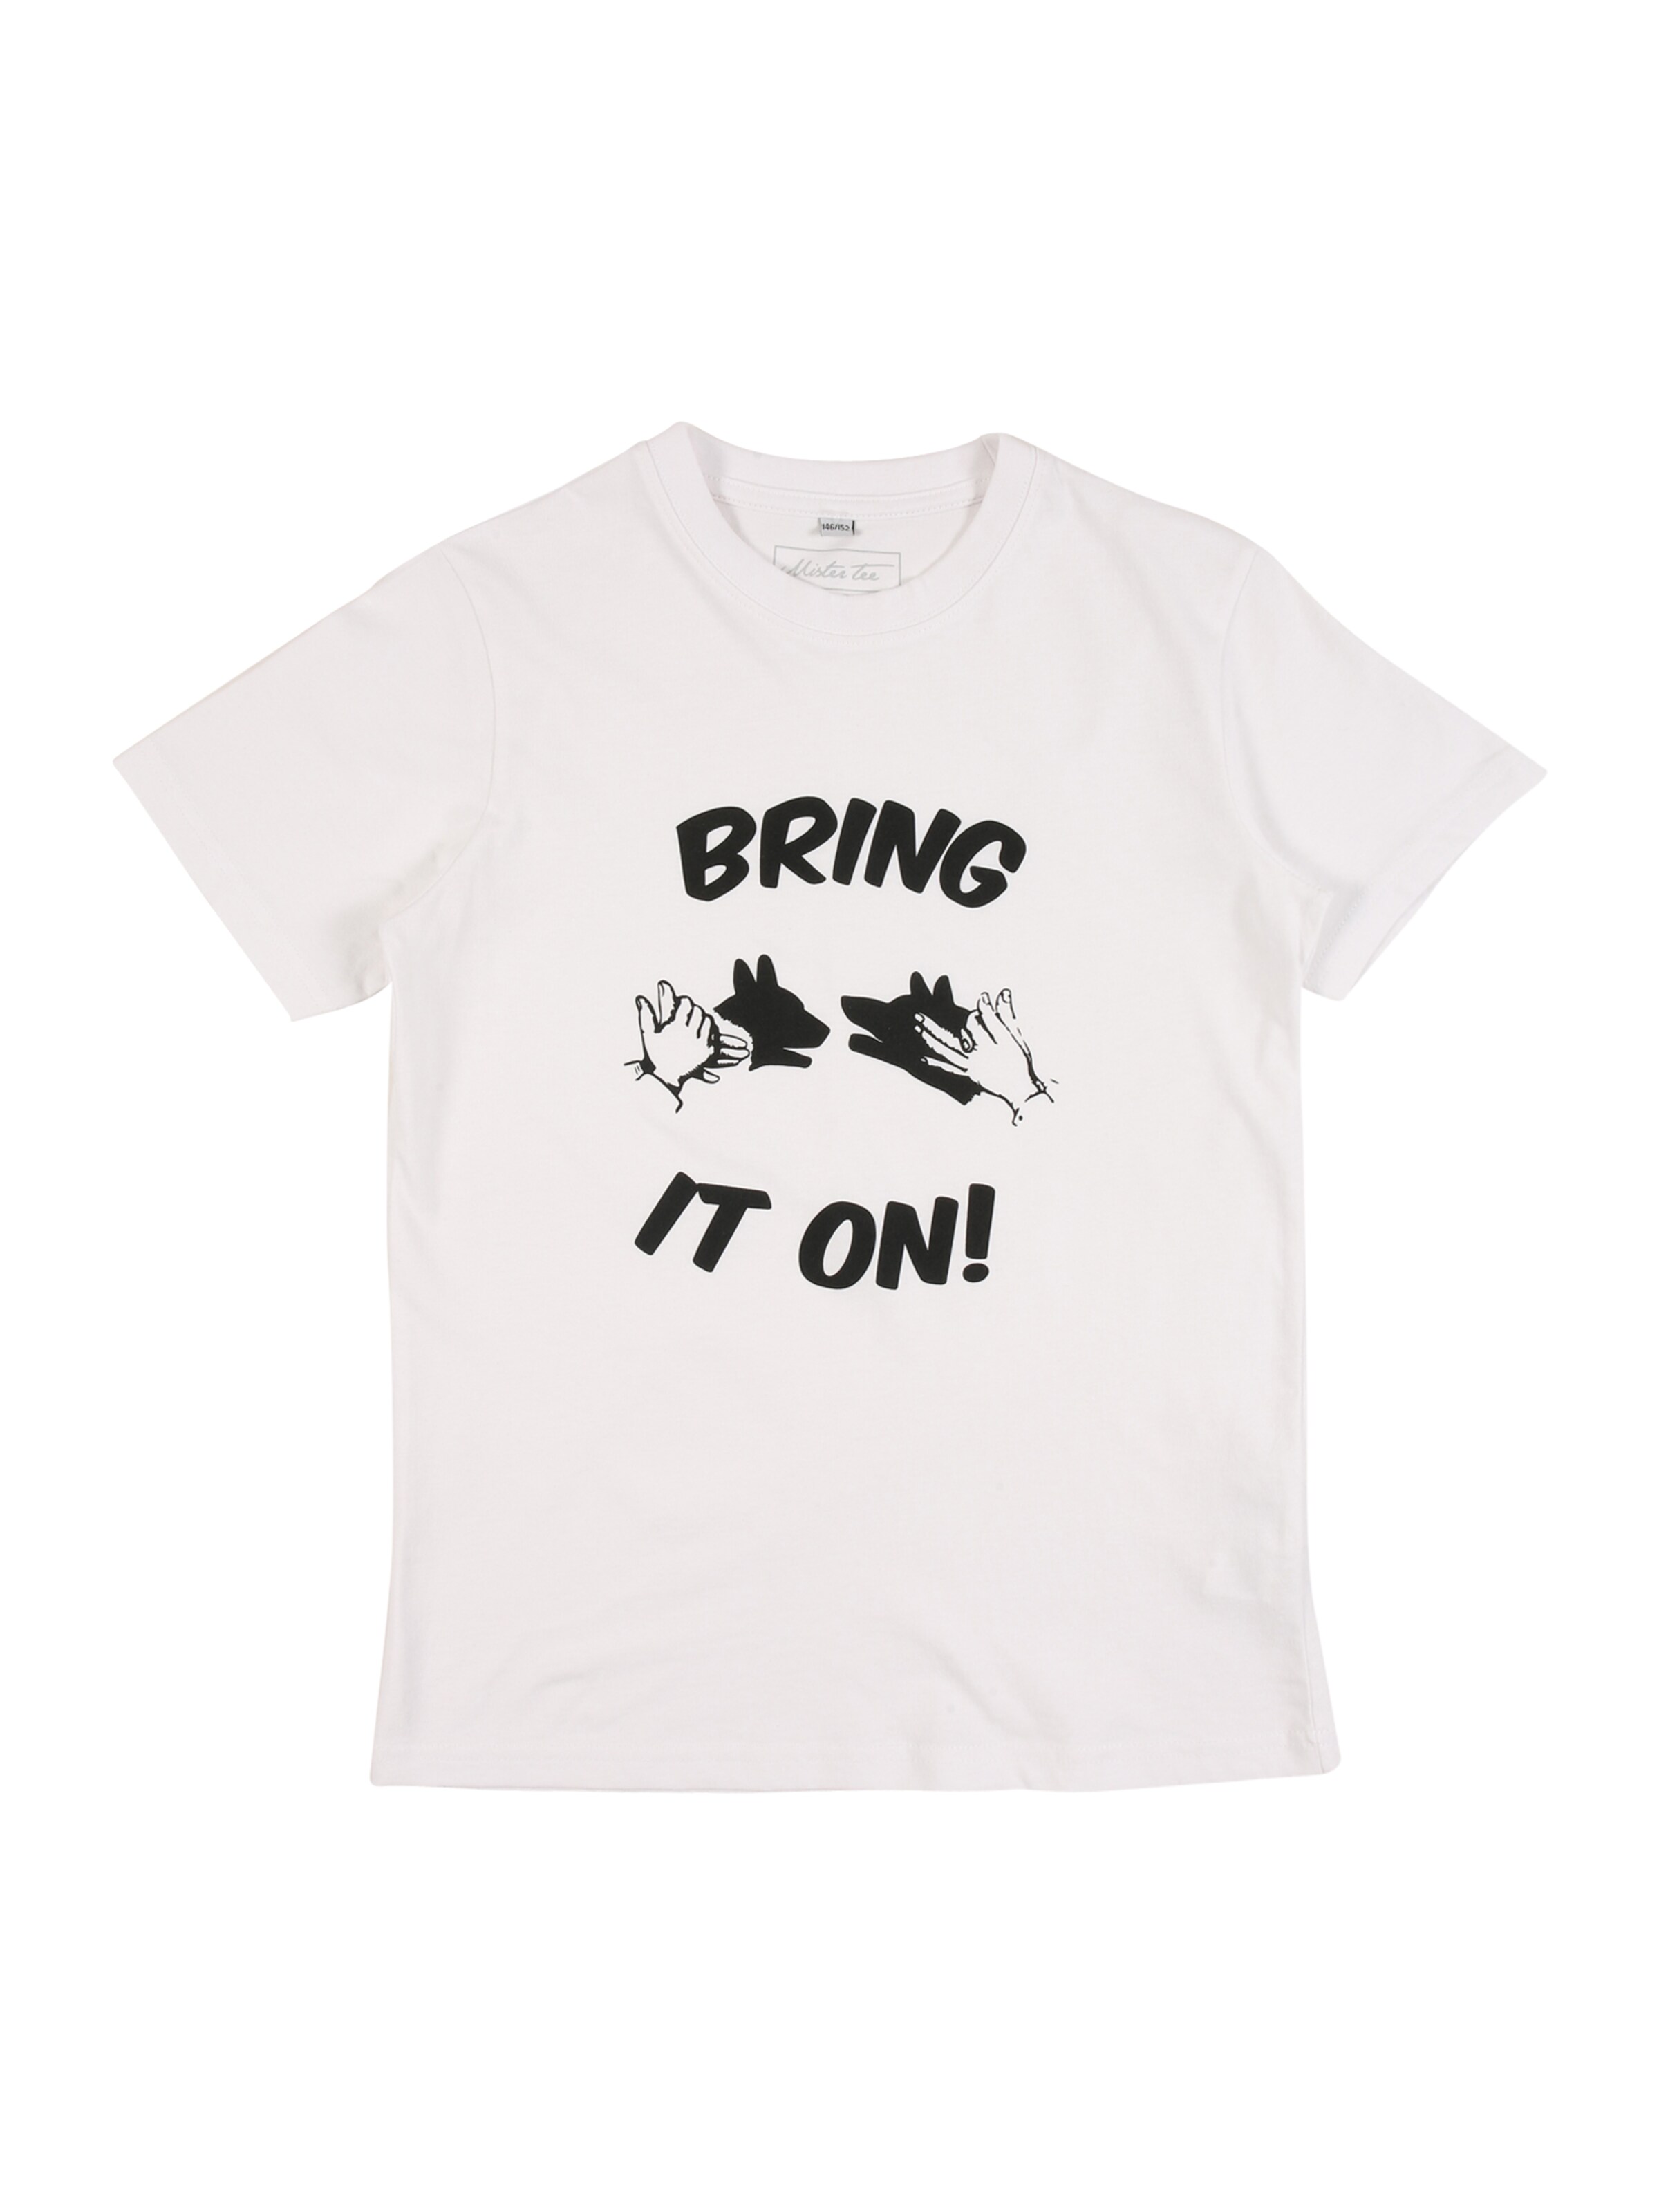 Mister Tee T-Shirt Bring It On Tee in Weiß 